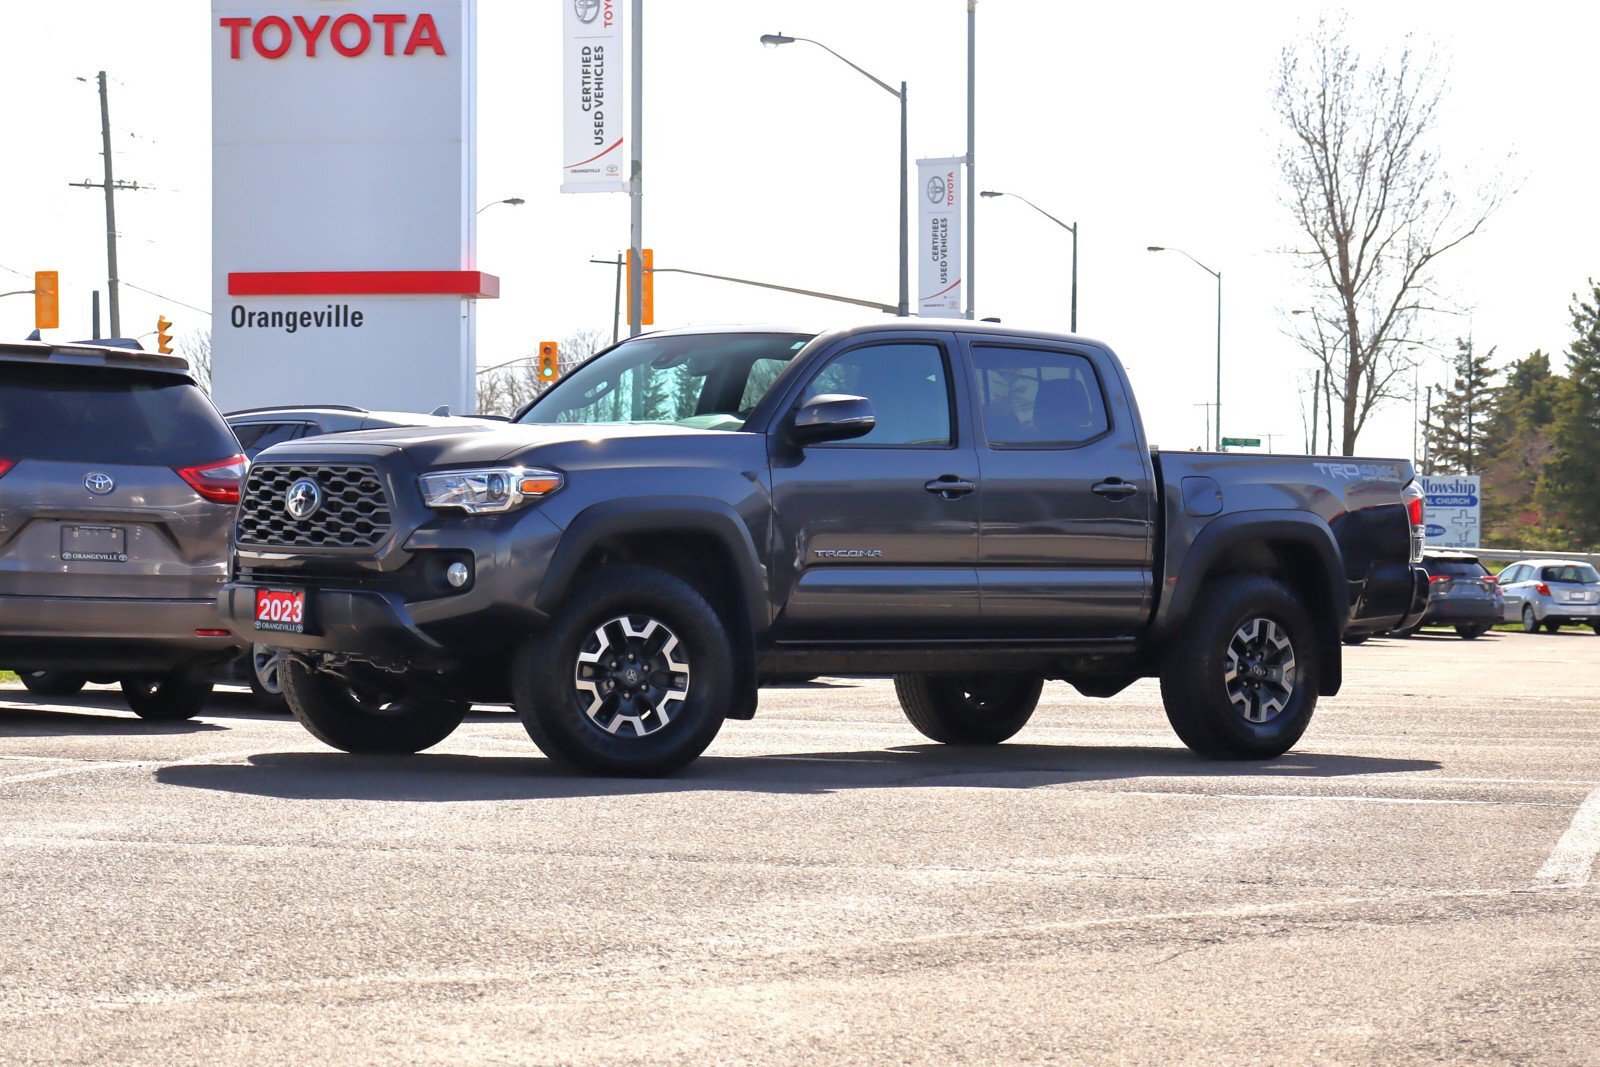 2023 Toyota Tacoma TRD Off-Road 4x4, Double Cab, Rear Diff Lock